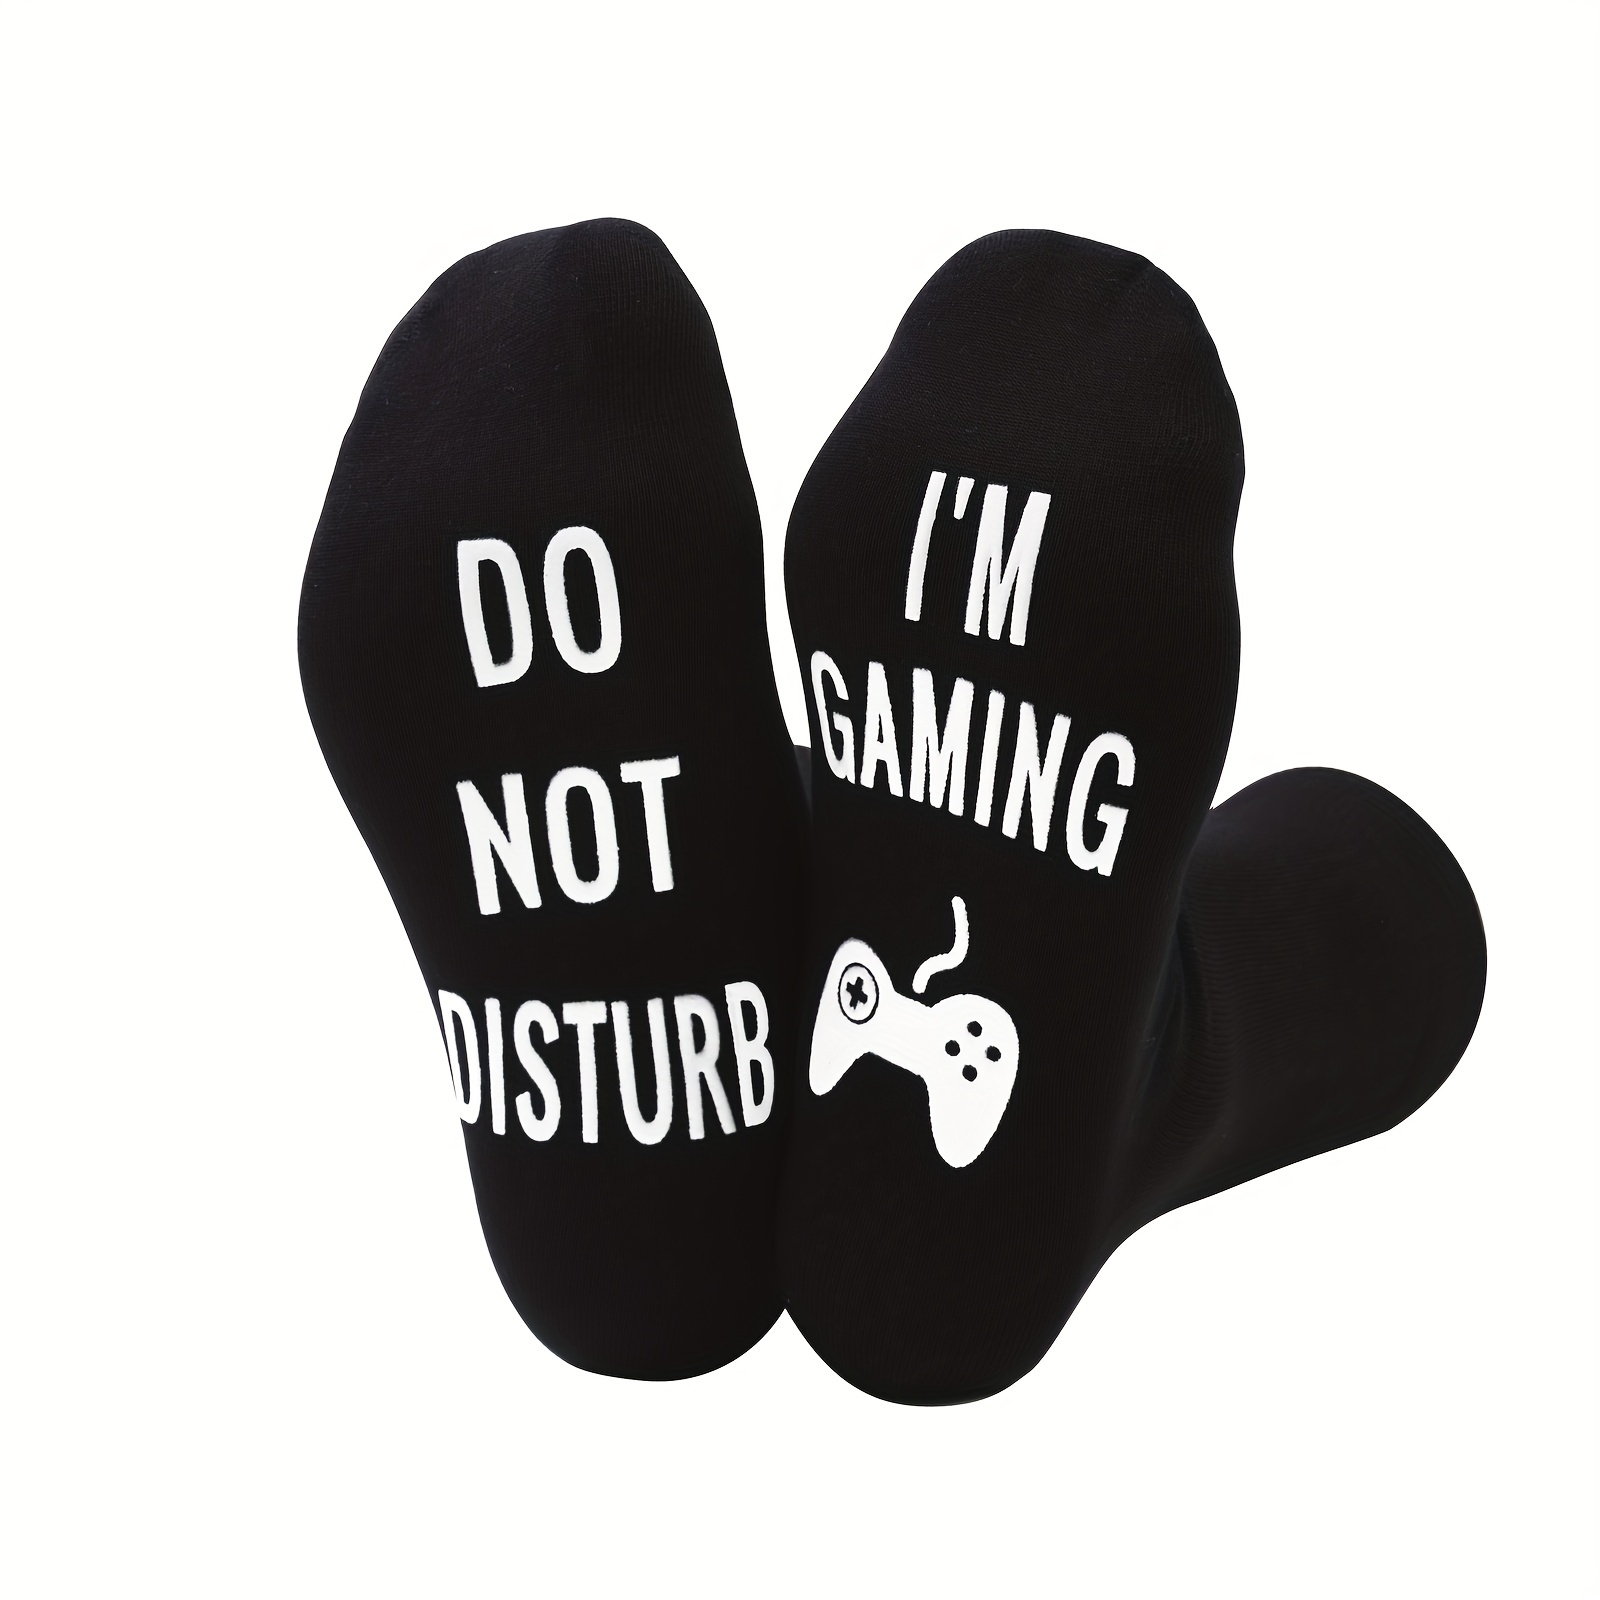 

' I Am Gaming ' Print Funny Novelty Cotton Crew Socks, Ideal Gifts For Men Husband Christmas Birthday Presents For Boy Friend